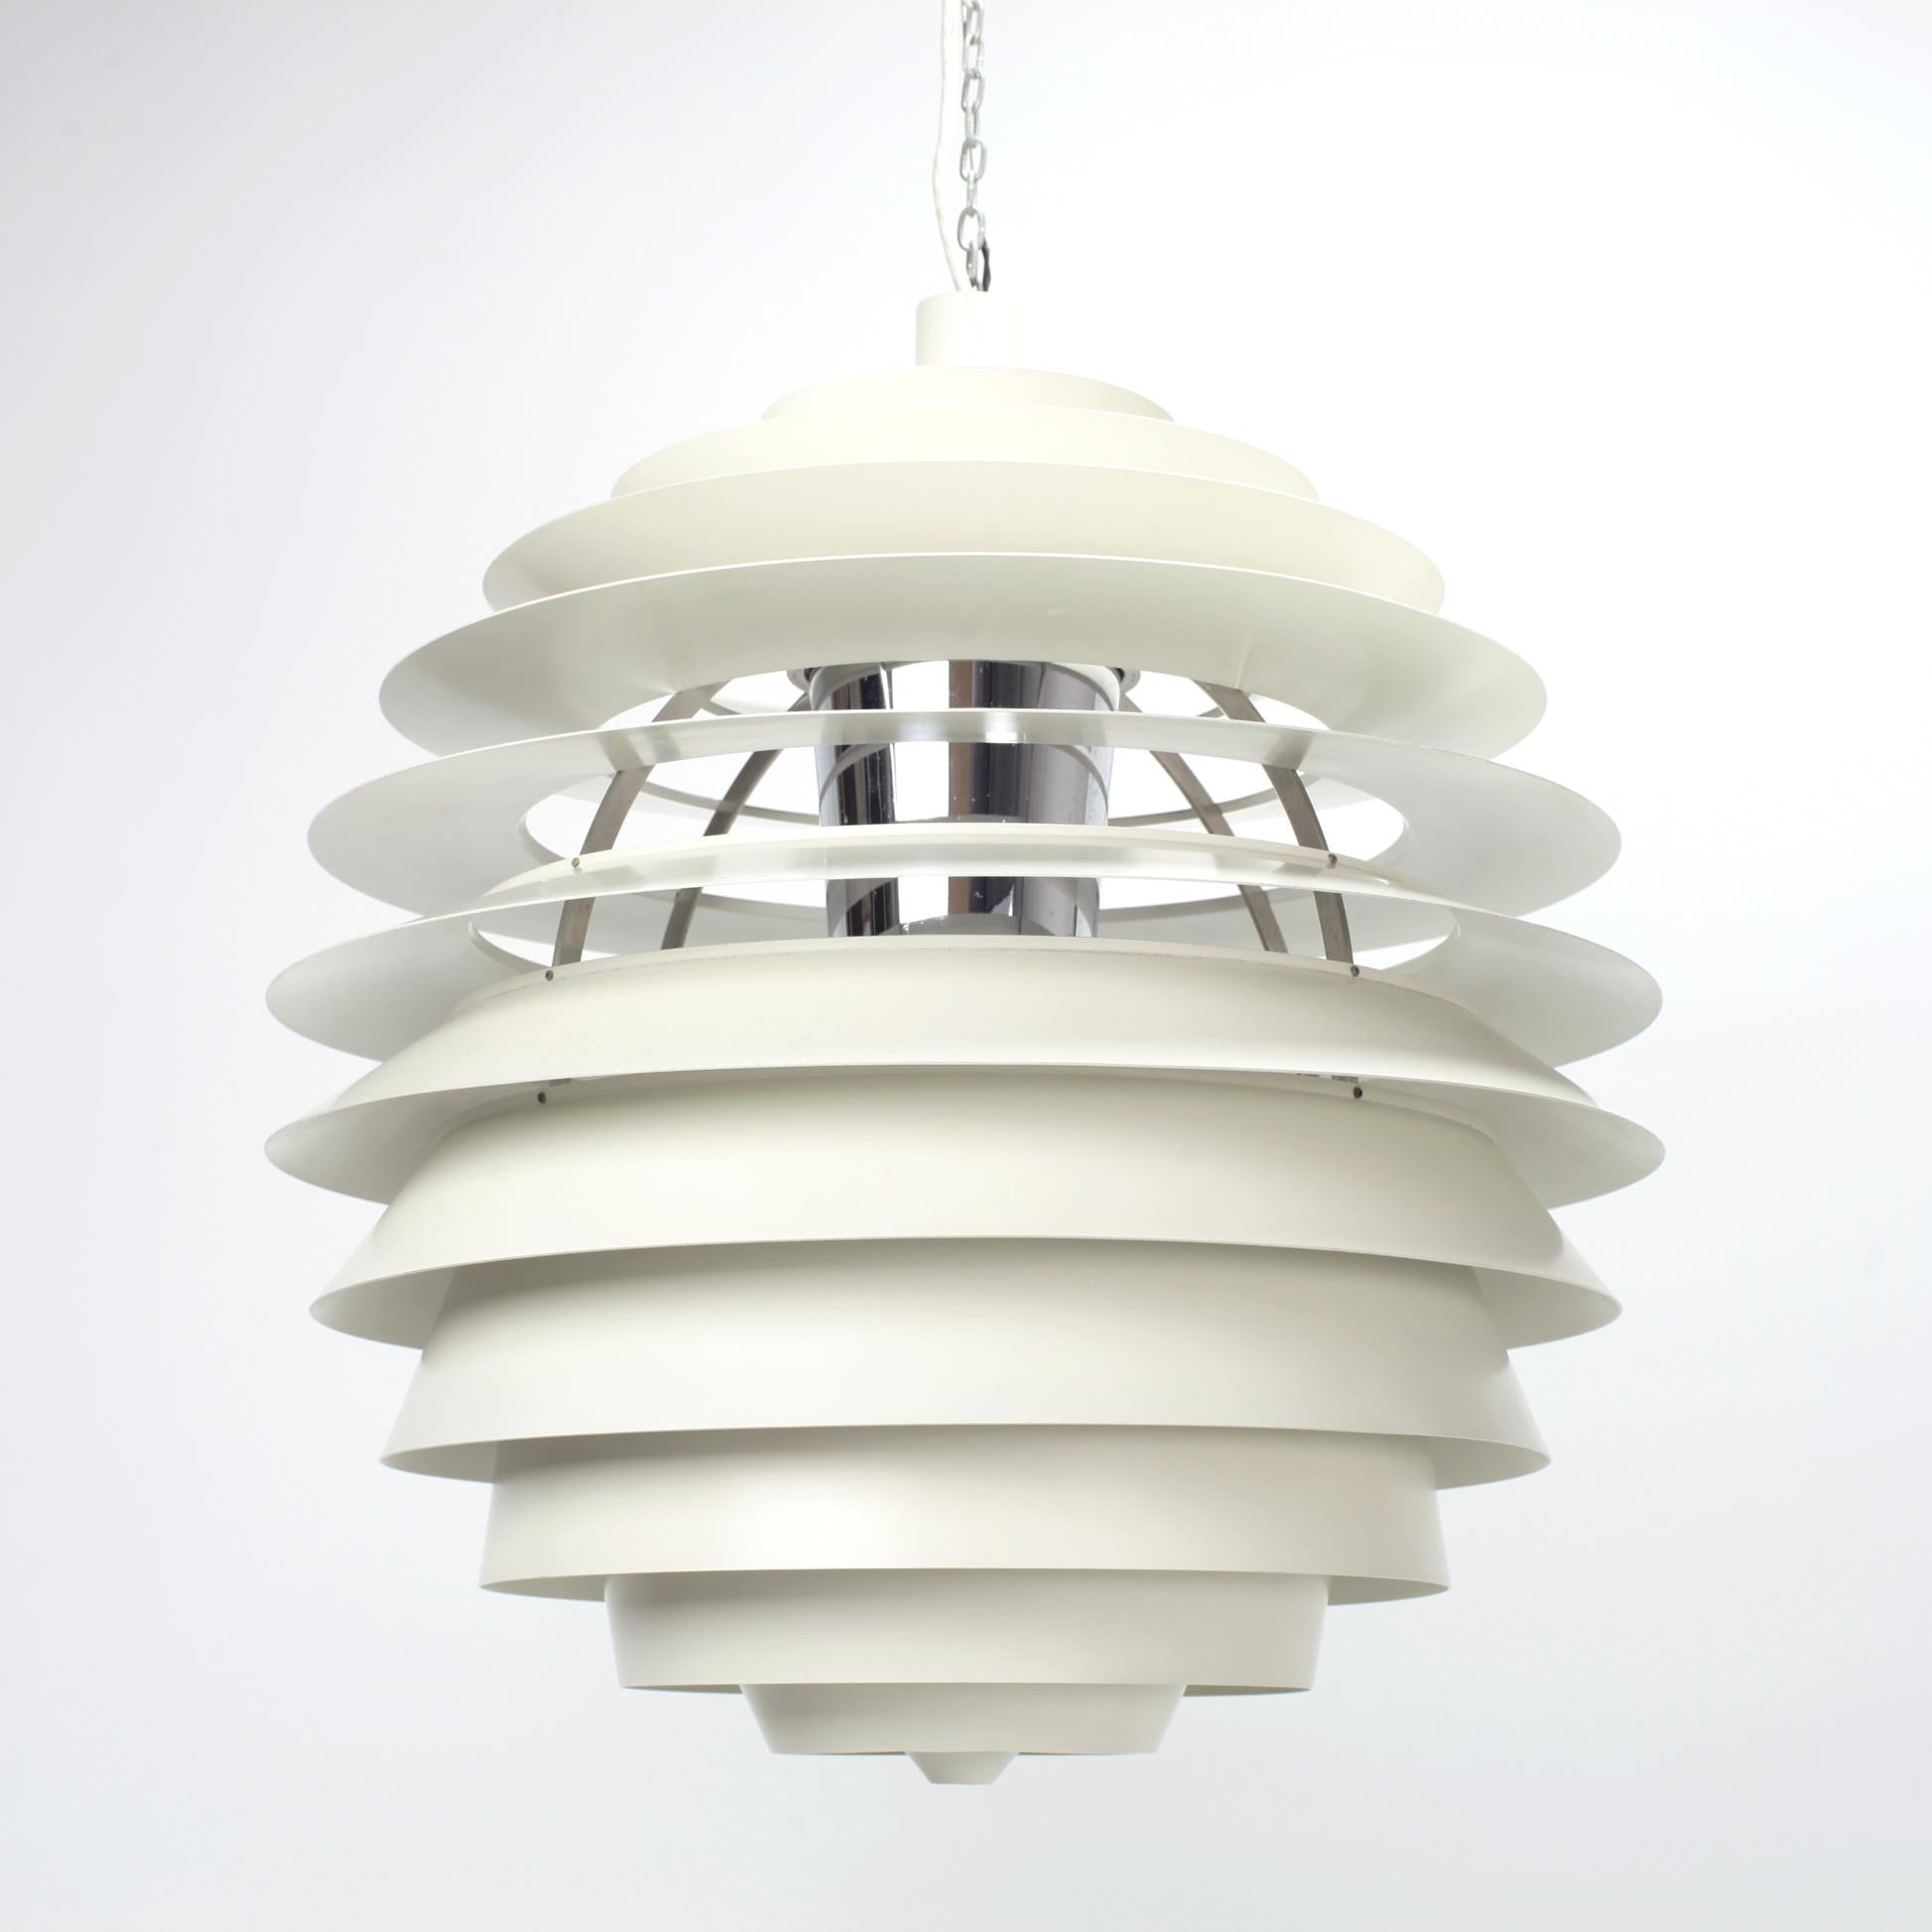 Iconic PH Louvre pendant created by Poul Henningsen in late 50s for Louis Poulsen Denmark. This lamp provides a soft and illuminating light without ever dazzling, the bulb is not visible. The construction of 13 geometric and spherical metal sheets